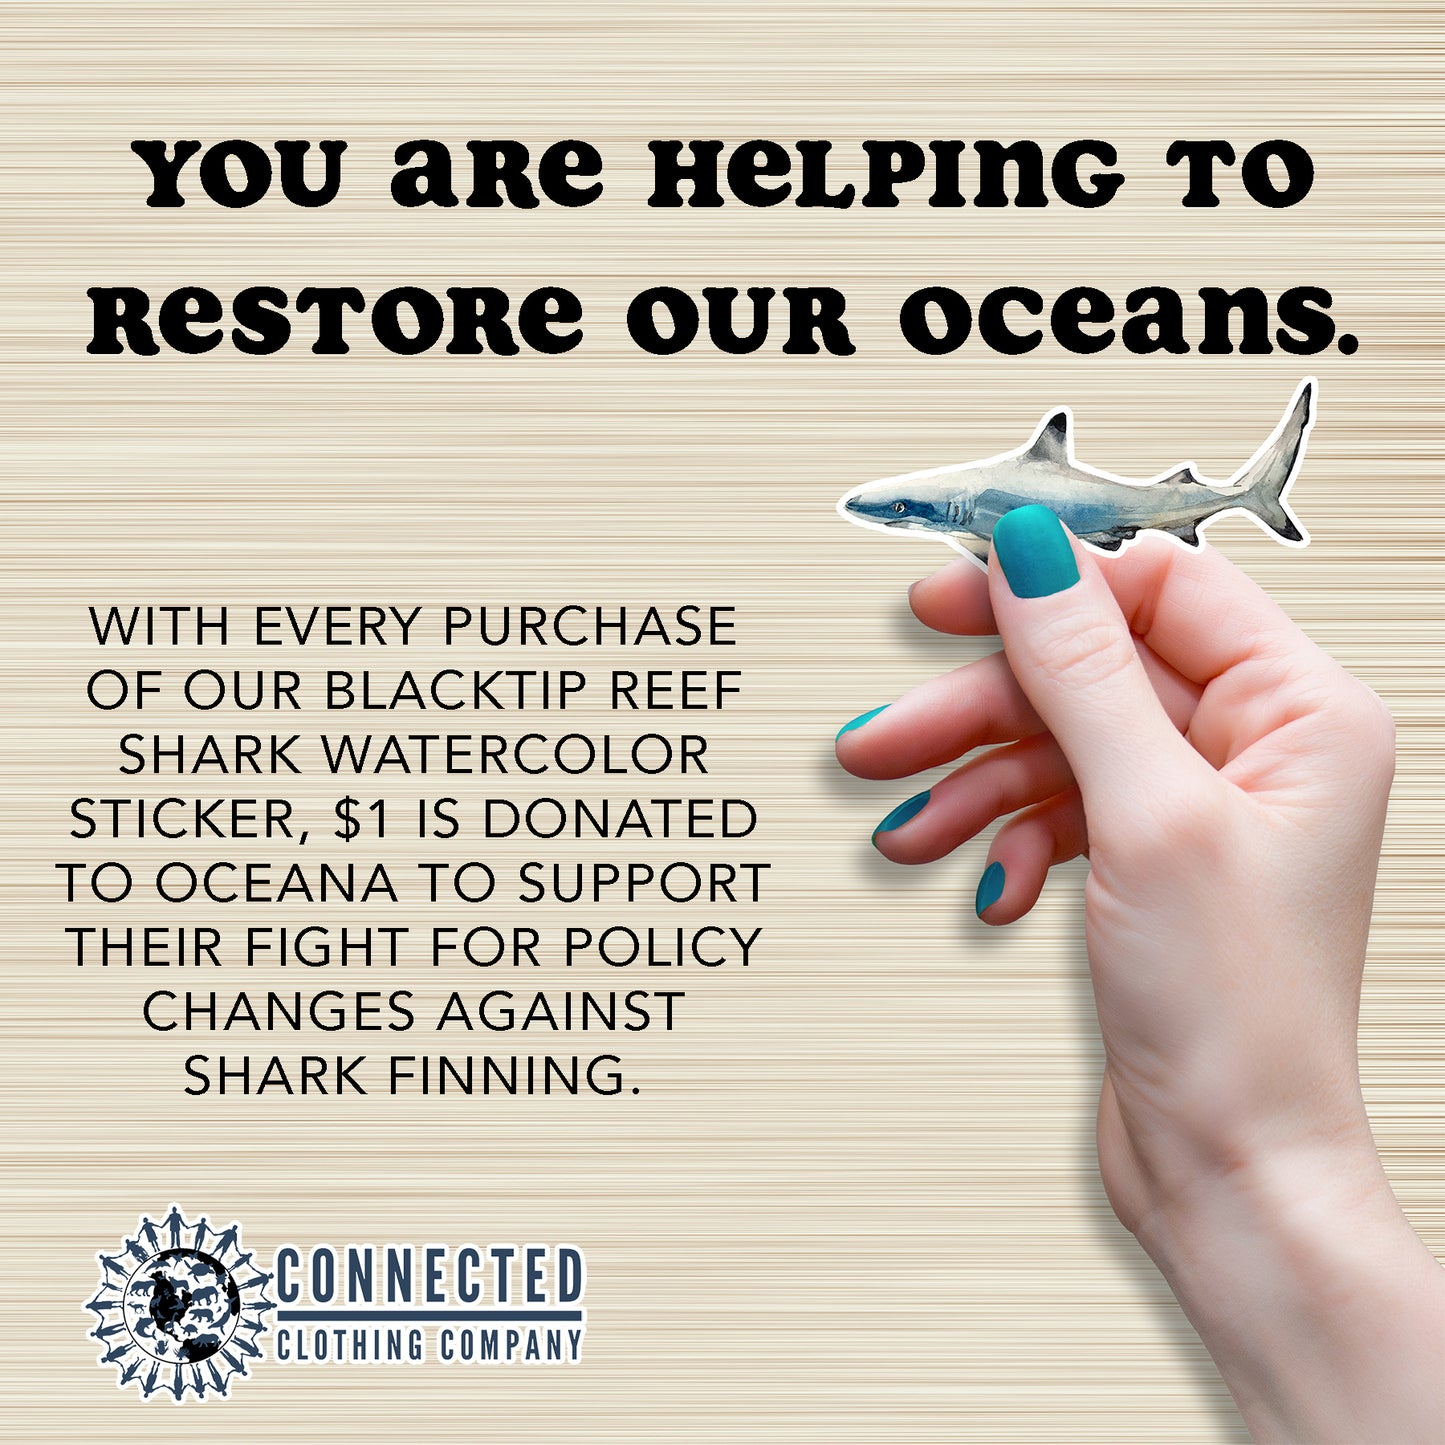 Hand Holding Reef Shark Watercolor Sticker - "You are helping to restore our oceans. With every purchase of our blacktip reef shark watercolor sticker, $1 is donated to oceana to support their fight for policy changes against shark finning." - sweetsherriloudesigns - Ethical and Sustainable Apparel - portion of profits donated to shark conservation